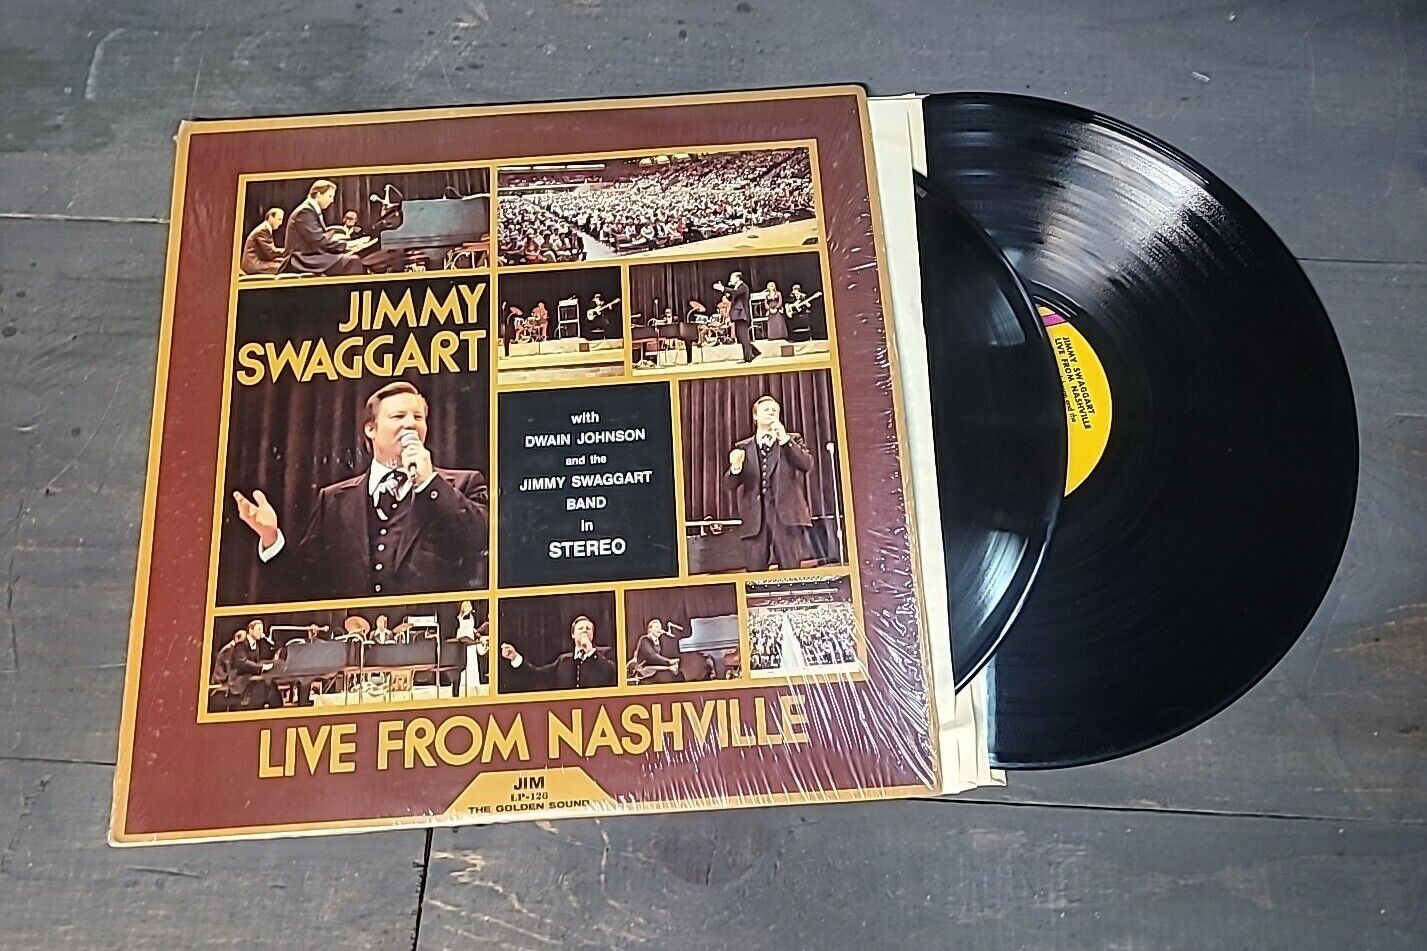 Jimmy Swaggart Live From Nashville Tennessee LP126 Vinyl Record 1977 33RPM Nice